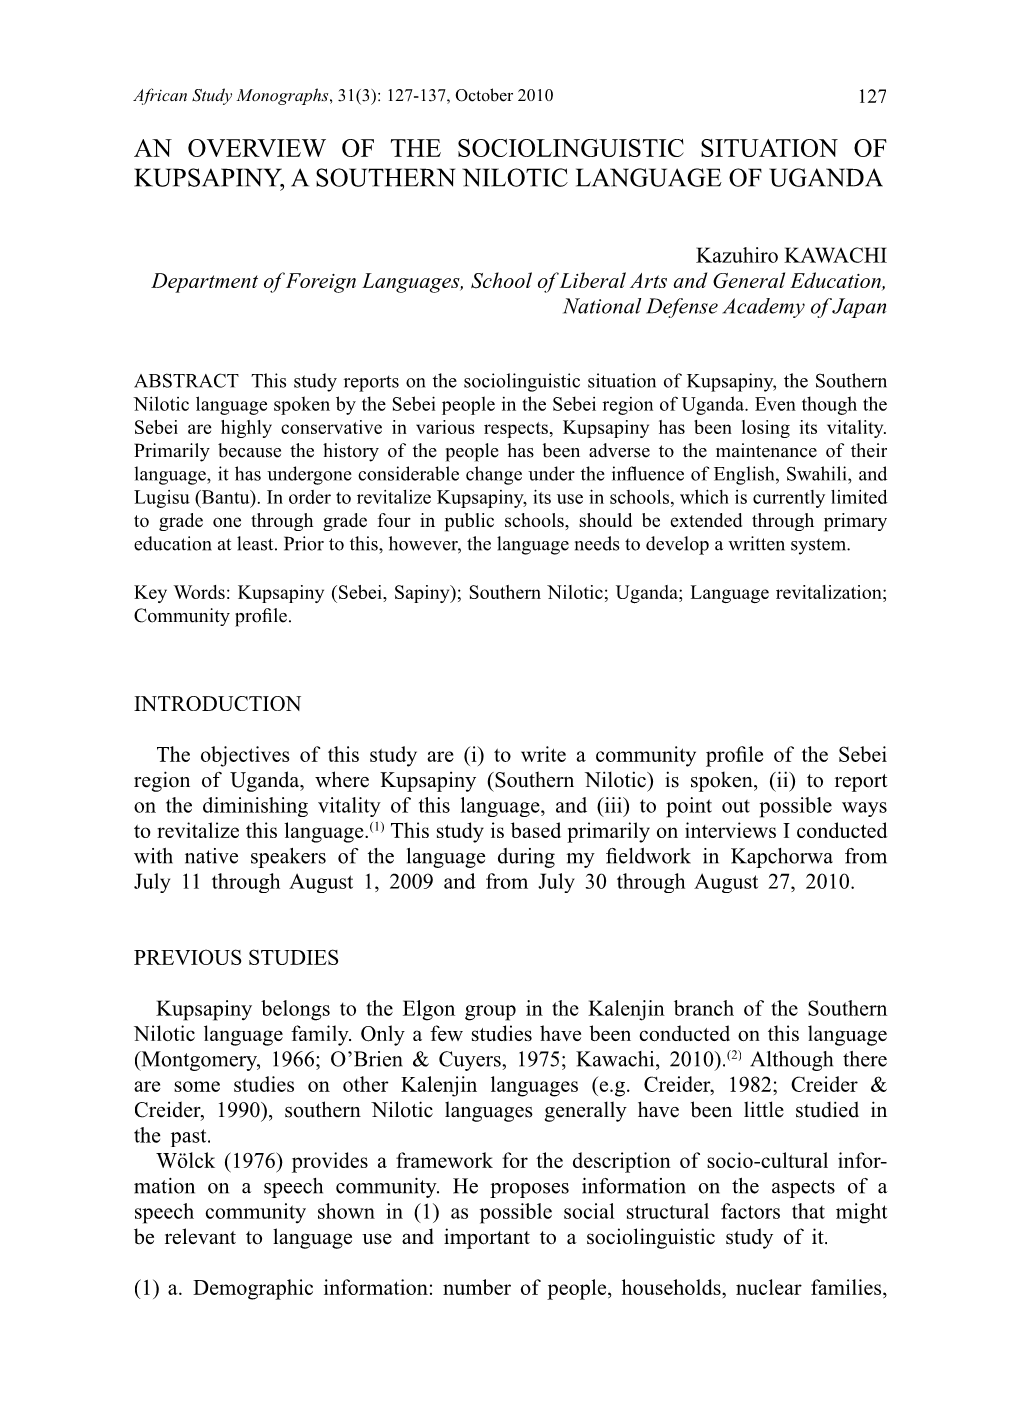 An Overview of the Sociolinguistic Situation of Kupsapiny, a Southern Nilotic Language of Uganda